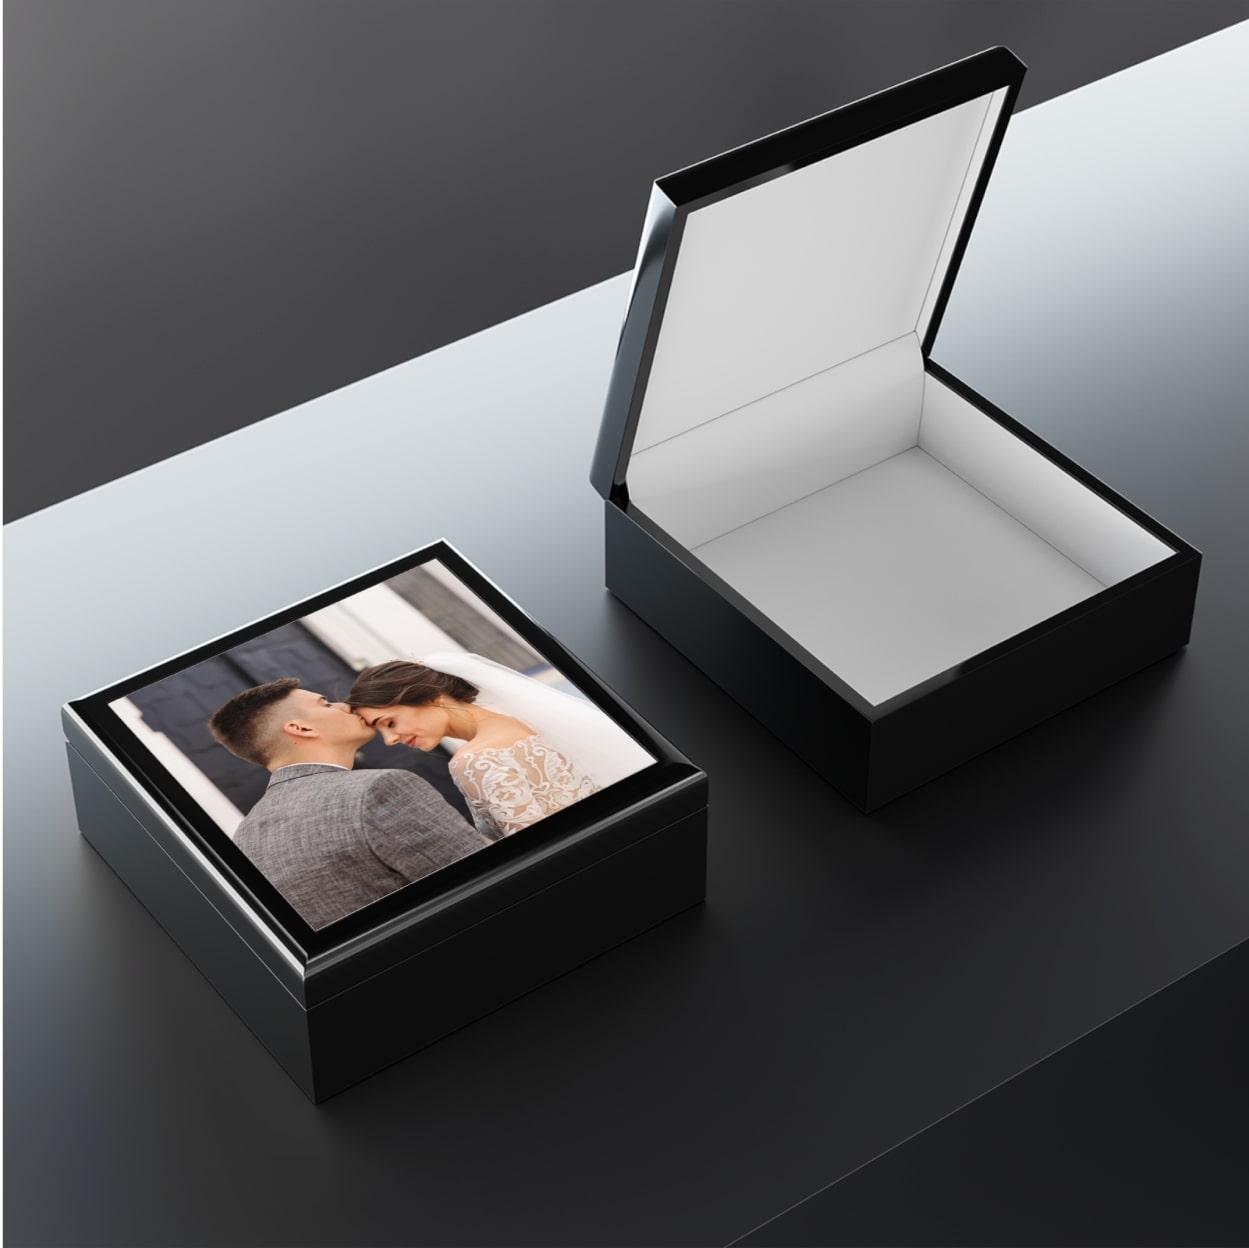 A mockup of a personalized jewelry box with a picture on top.